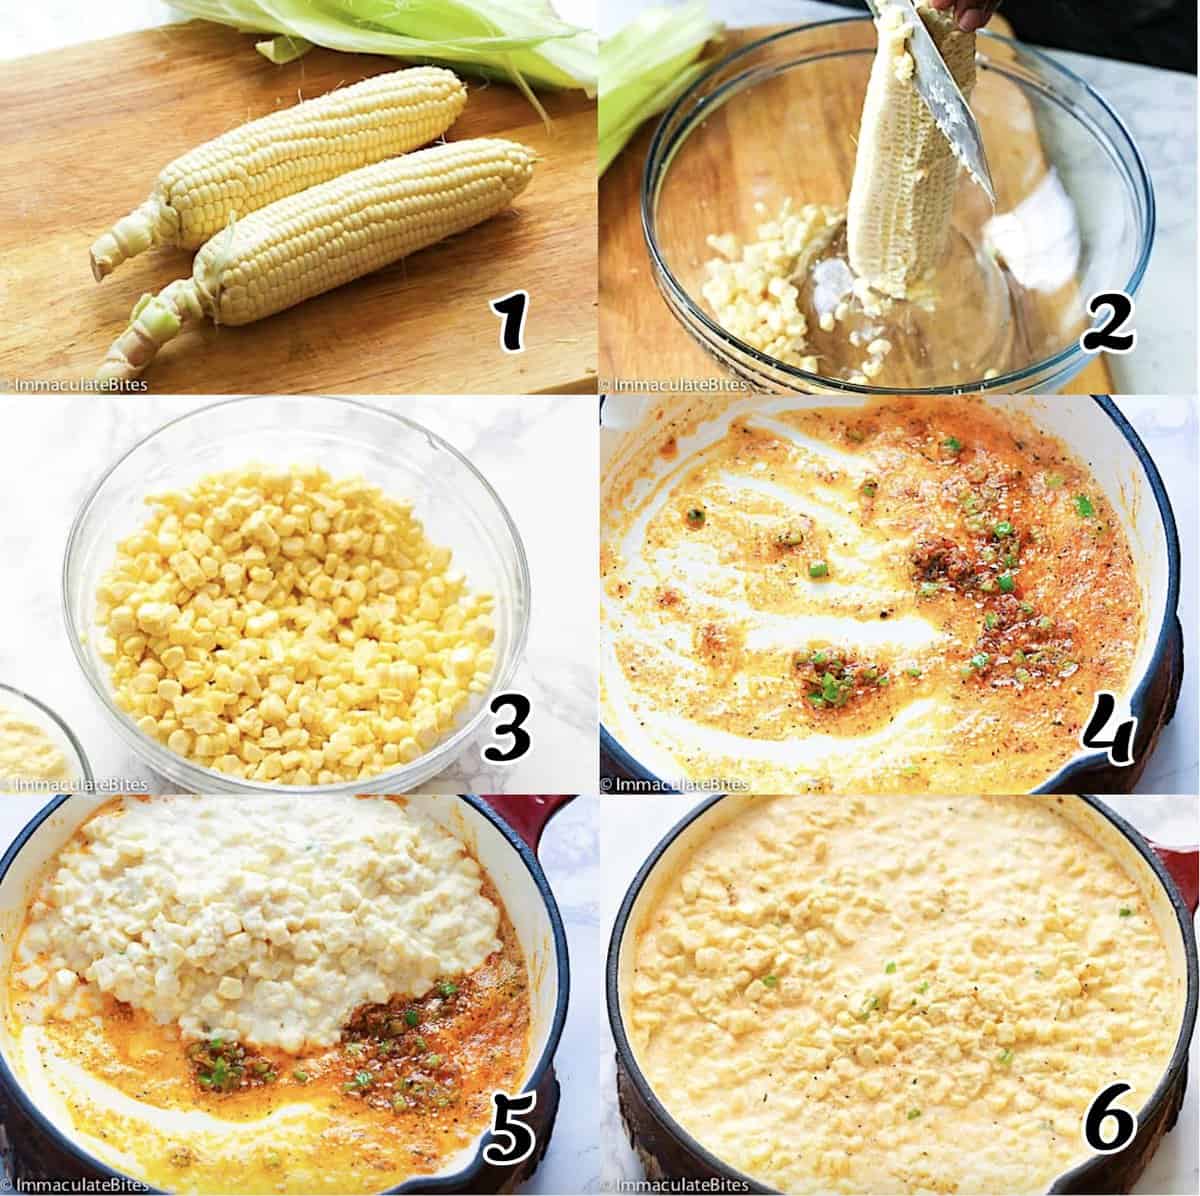 Remove the corn from the cob, add seasonings and combine